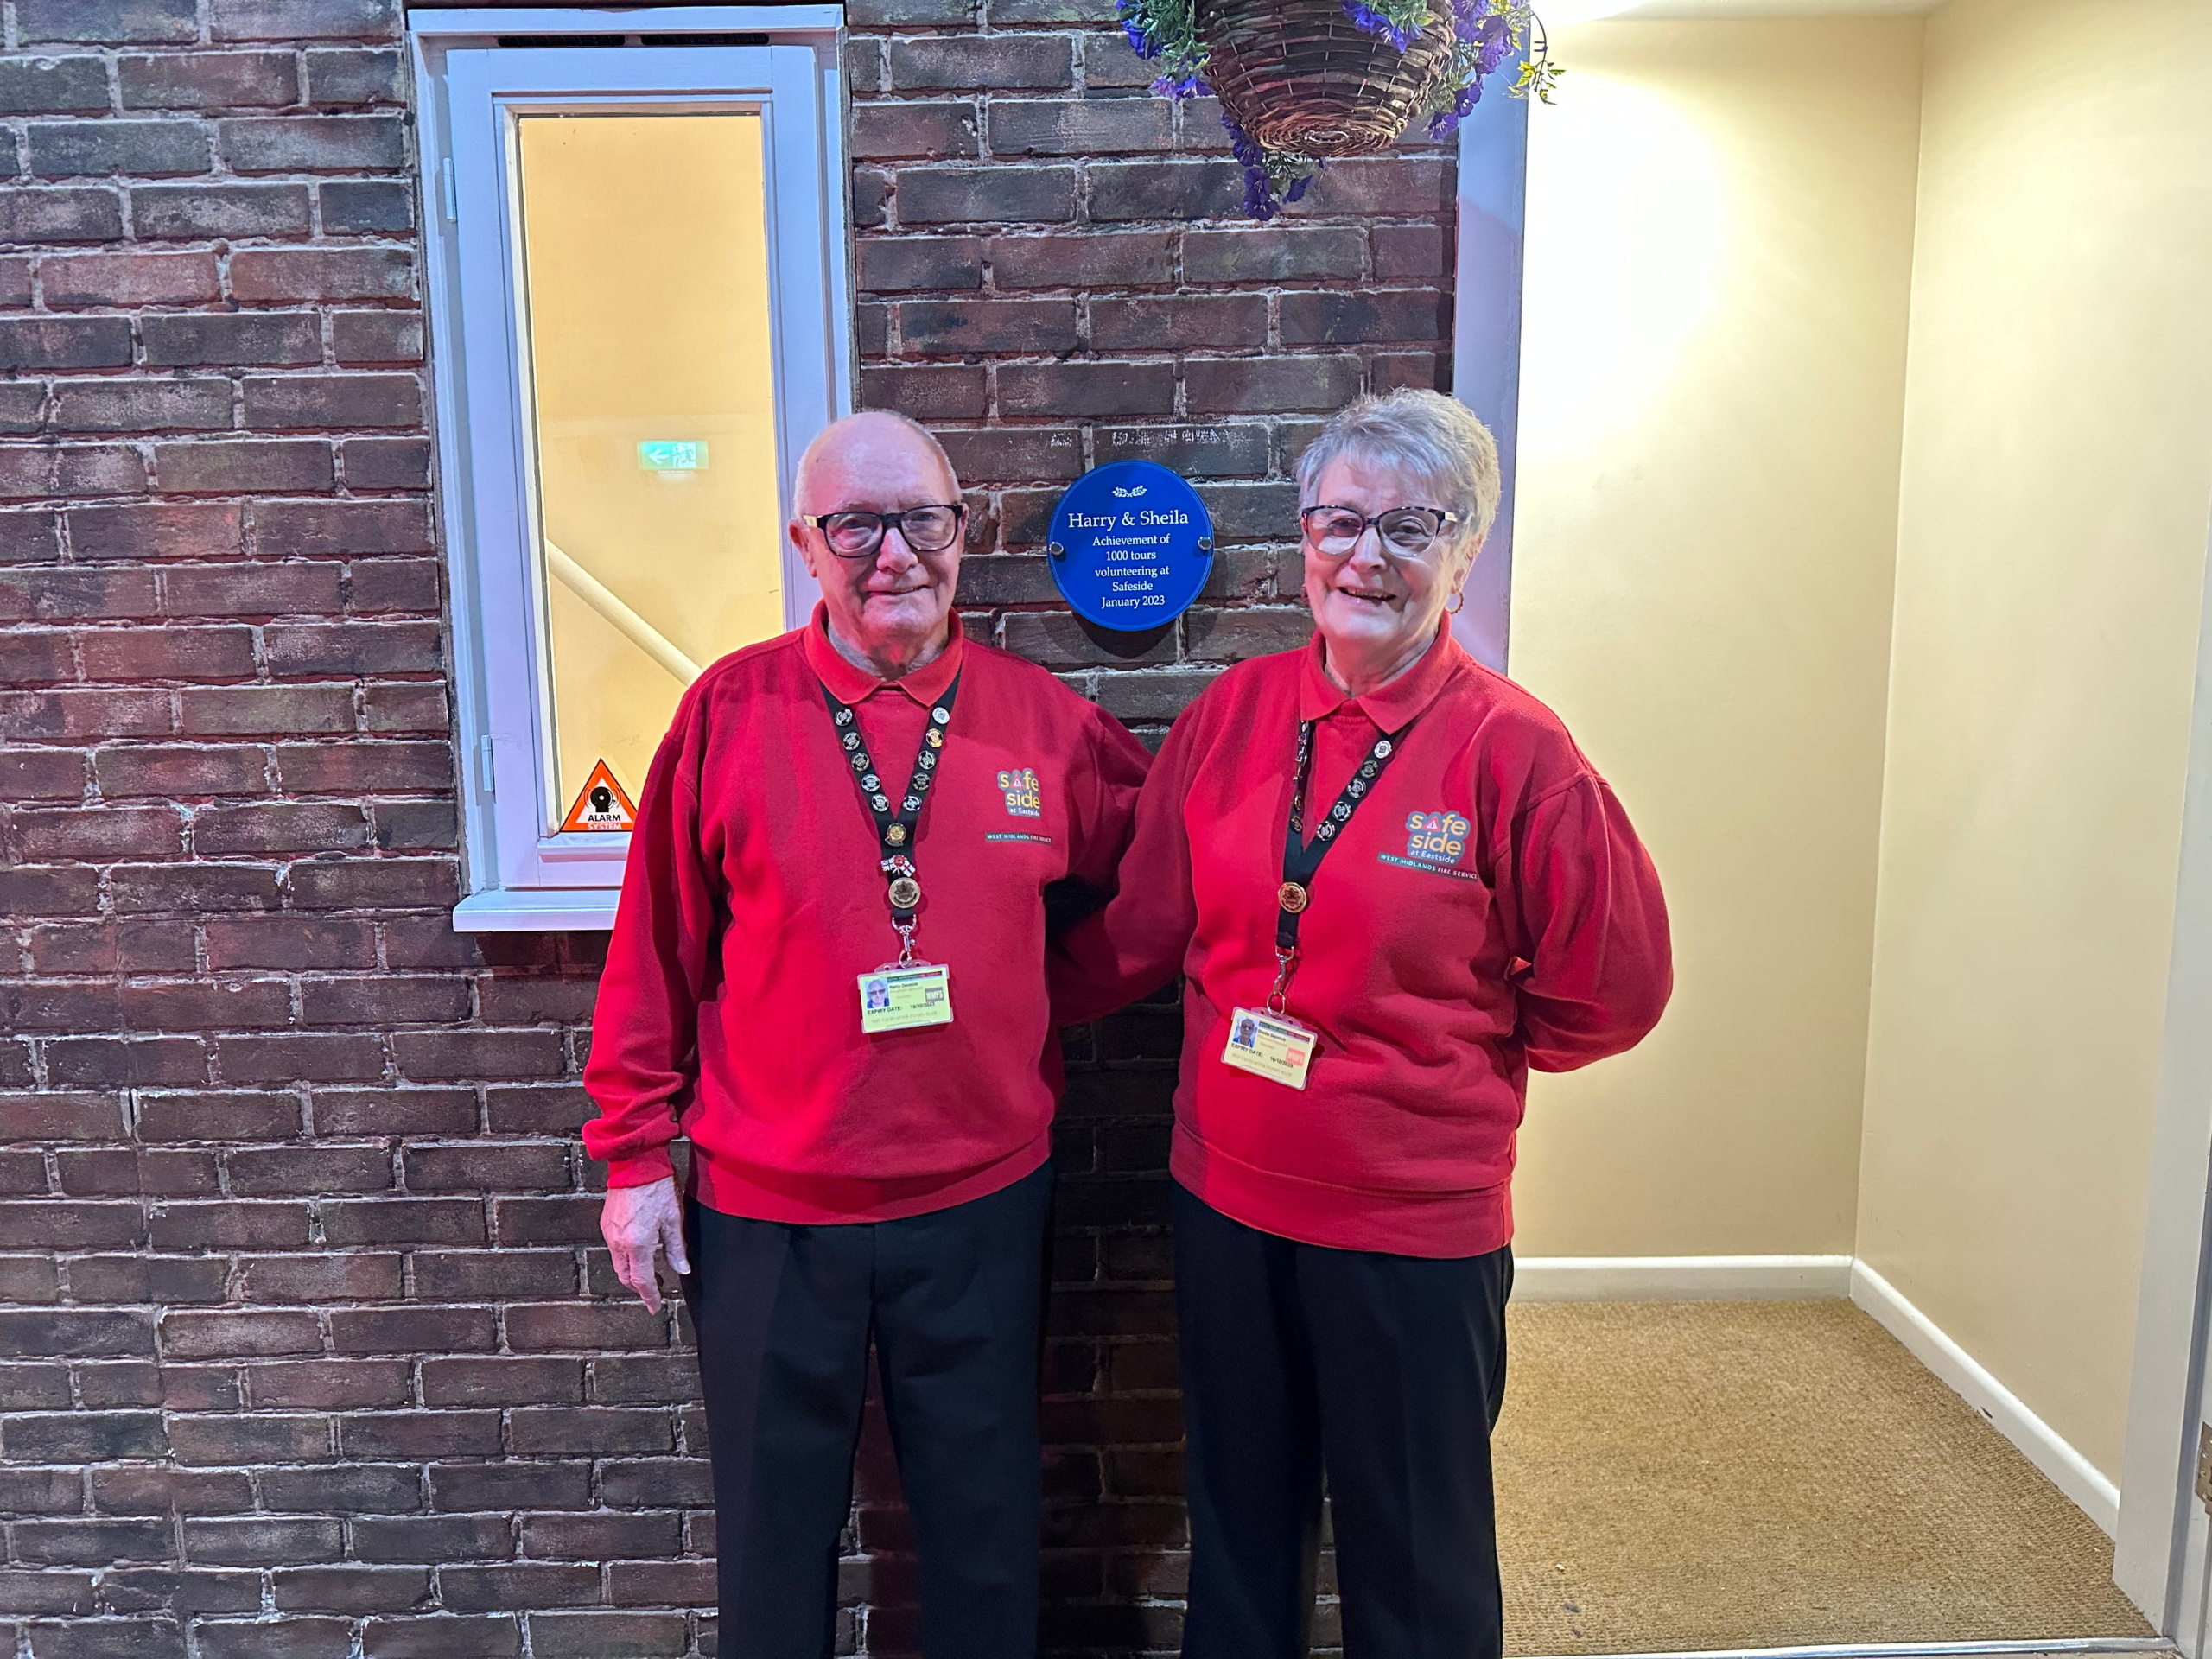 Harry and Sheila stood beside the plaque recognising their achievement of 1000 tours volunteering at Safeside.